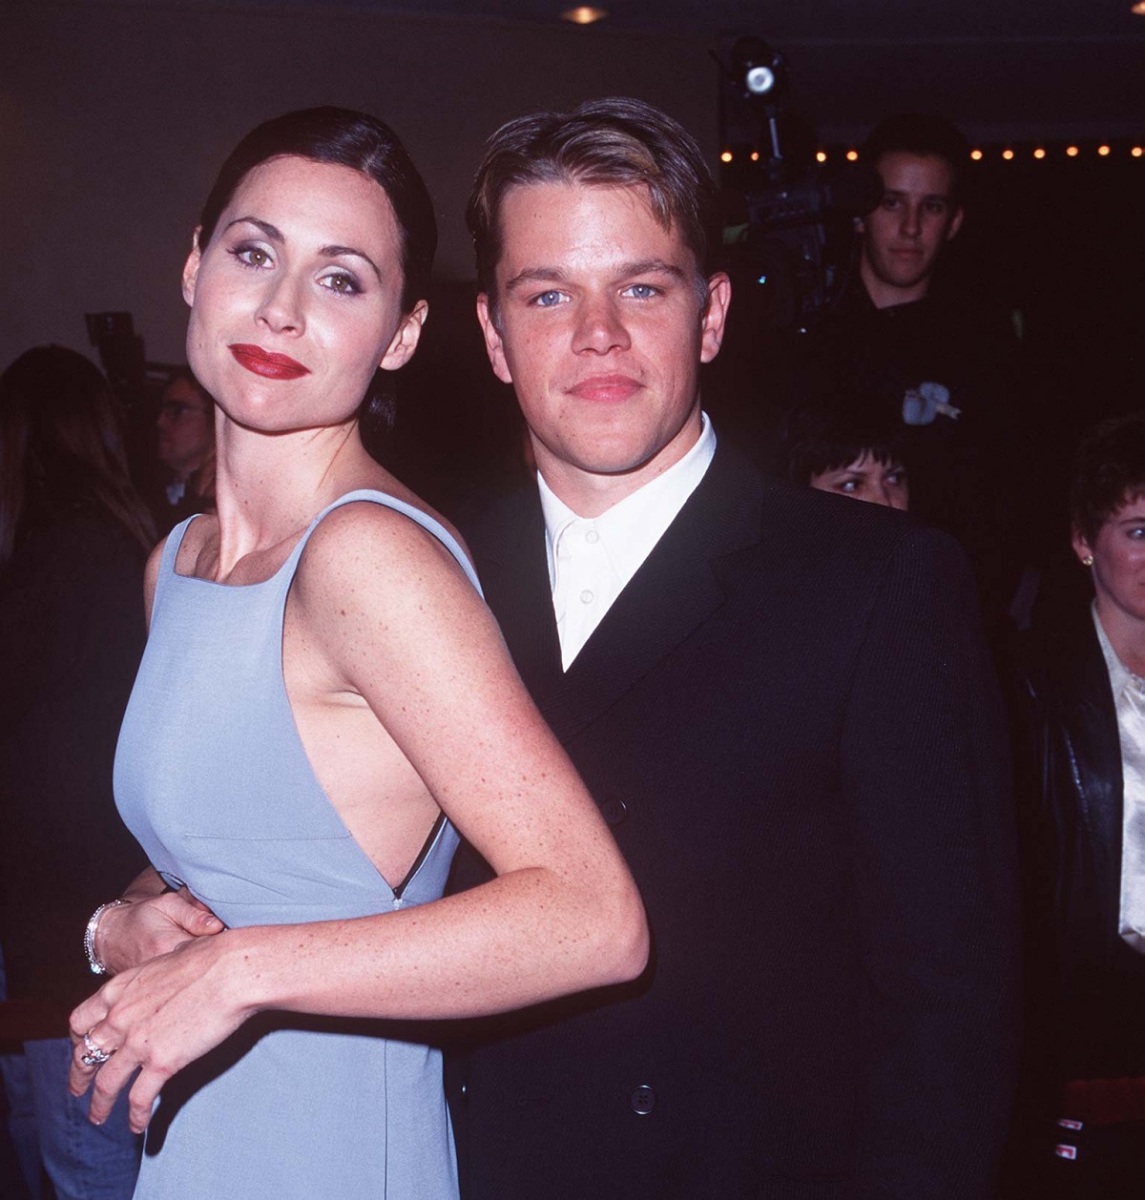 Minnie Driver and Matt Damon pose together at AFI Benefit Premiere of Good Will Hunting